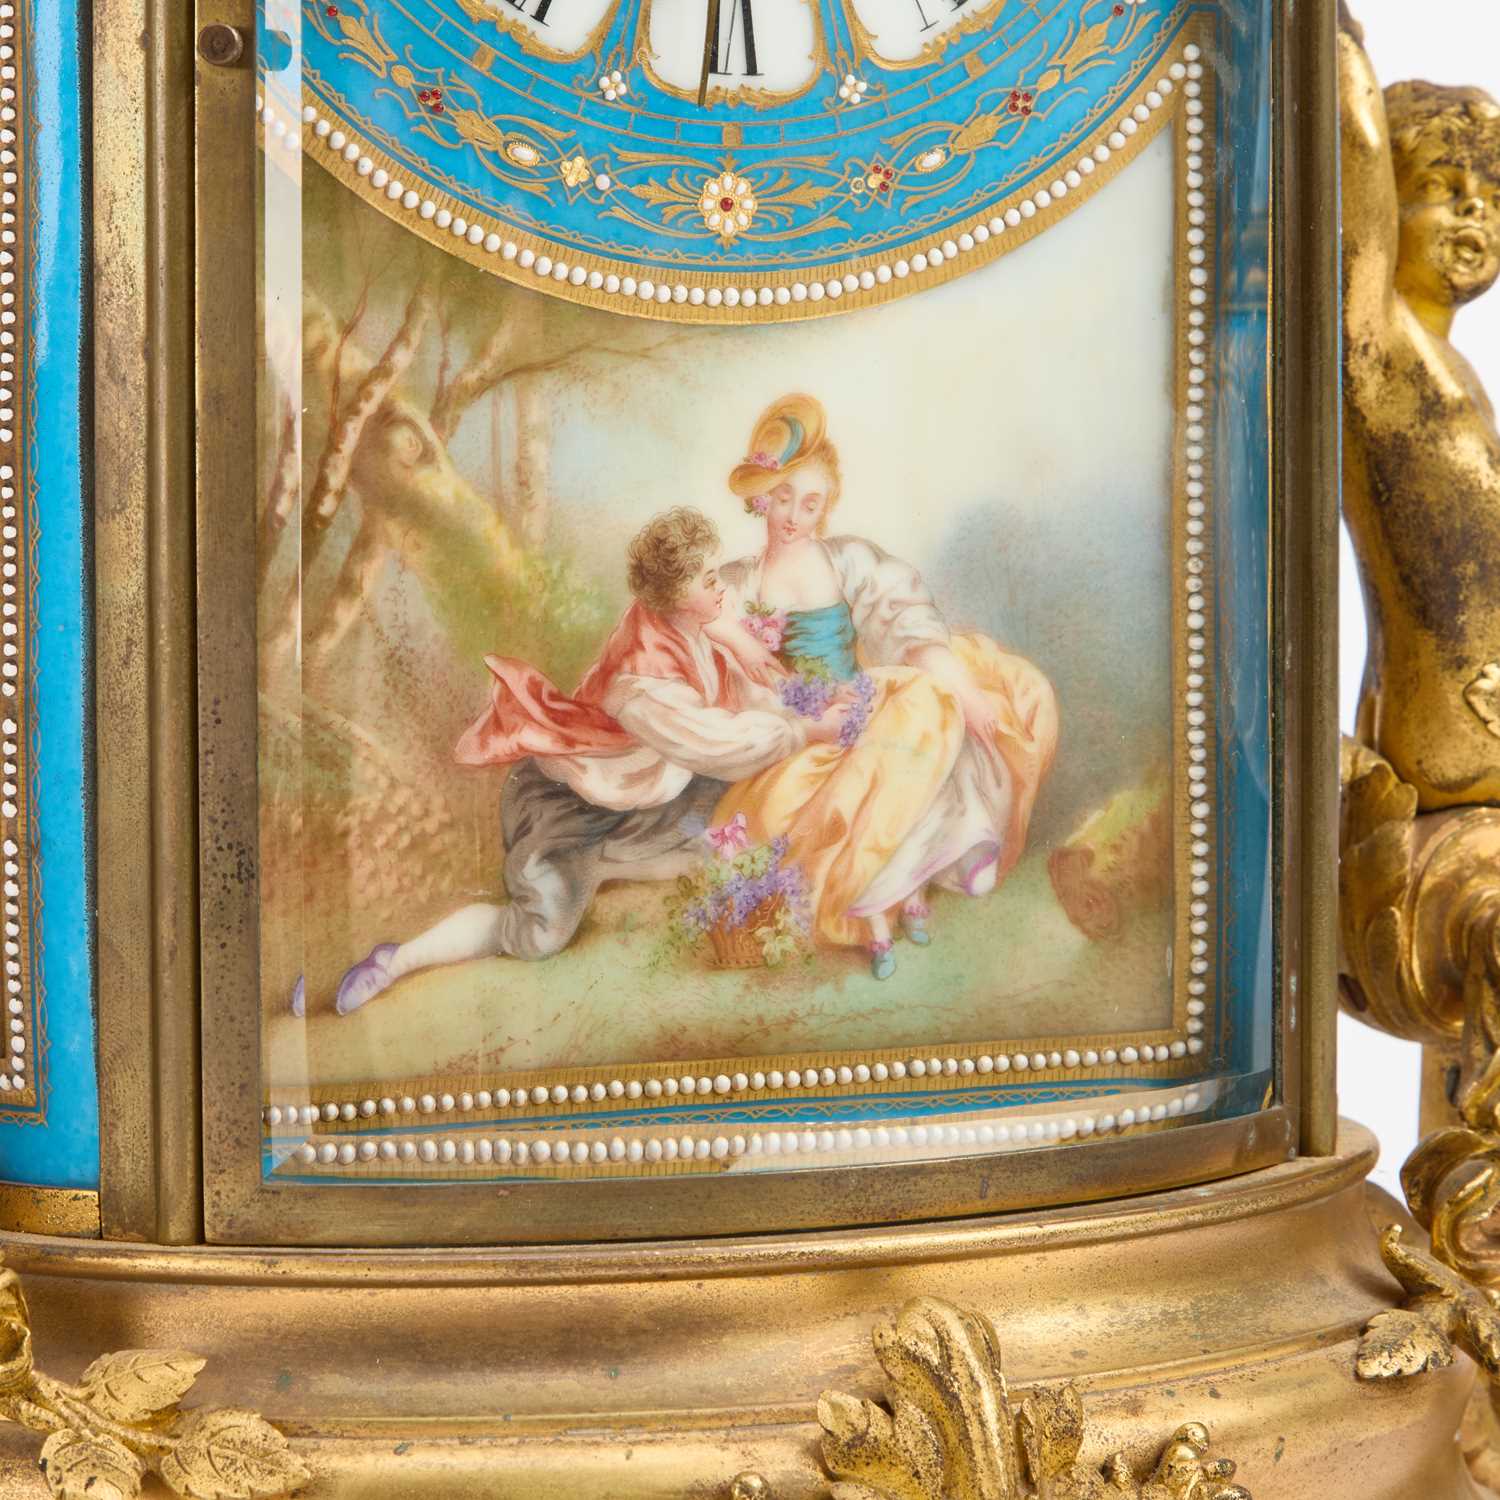 A FINE 19TH CENTURY FRENCH ORMOLU-MOUNTED 'SÈVRES' PORCELAIN CLOCK GARNITURE - Image 4 of 5